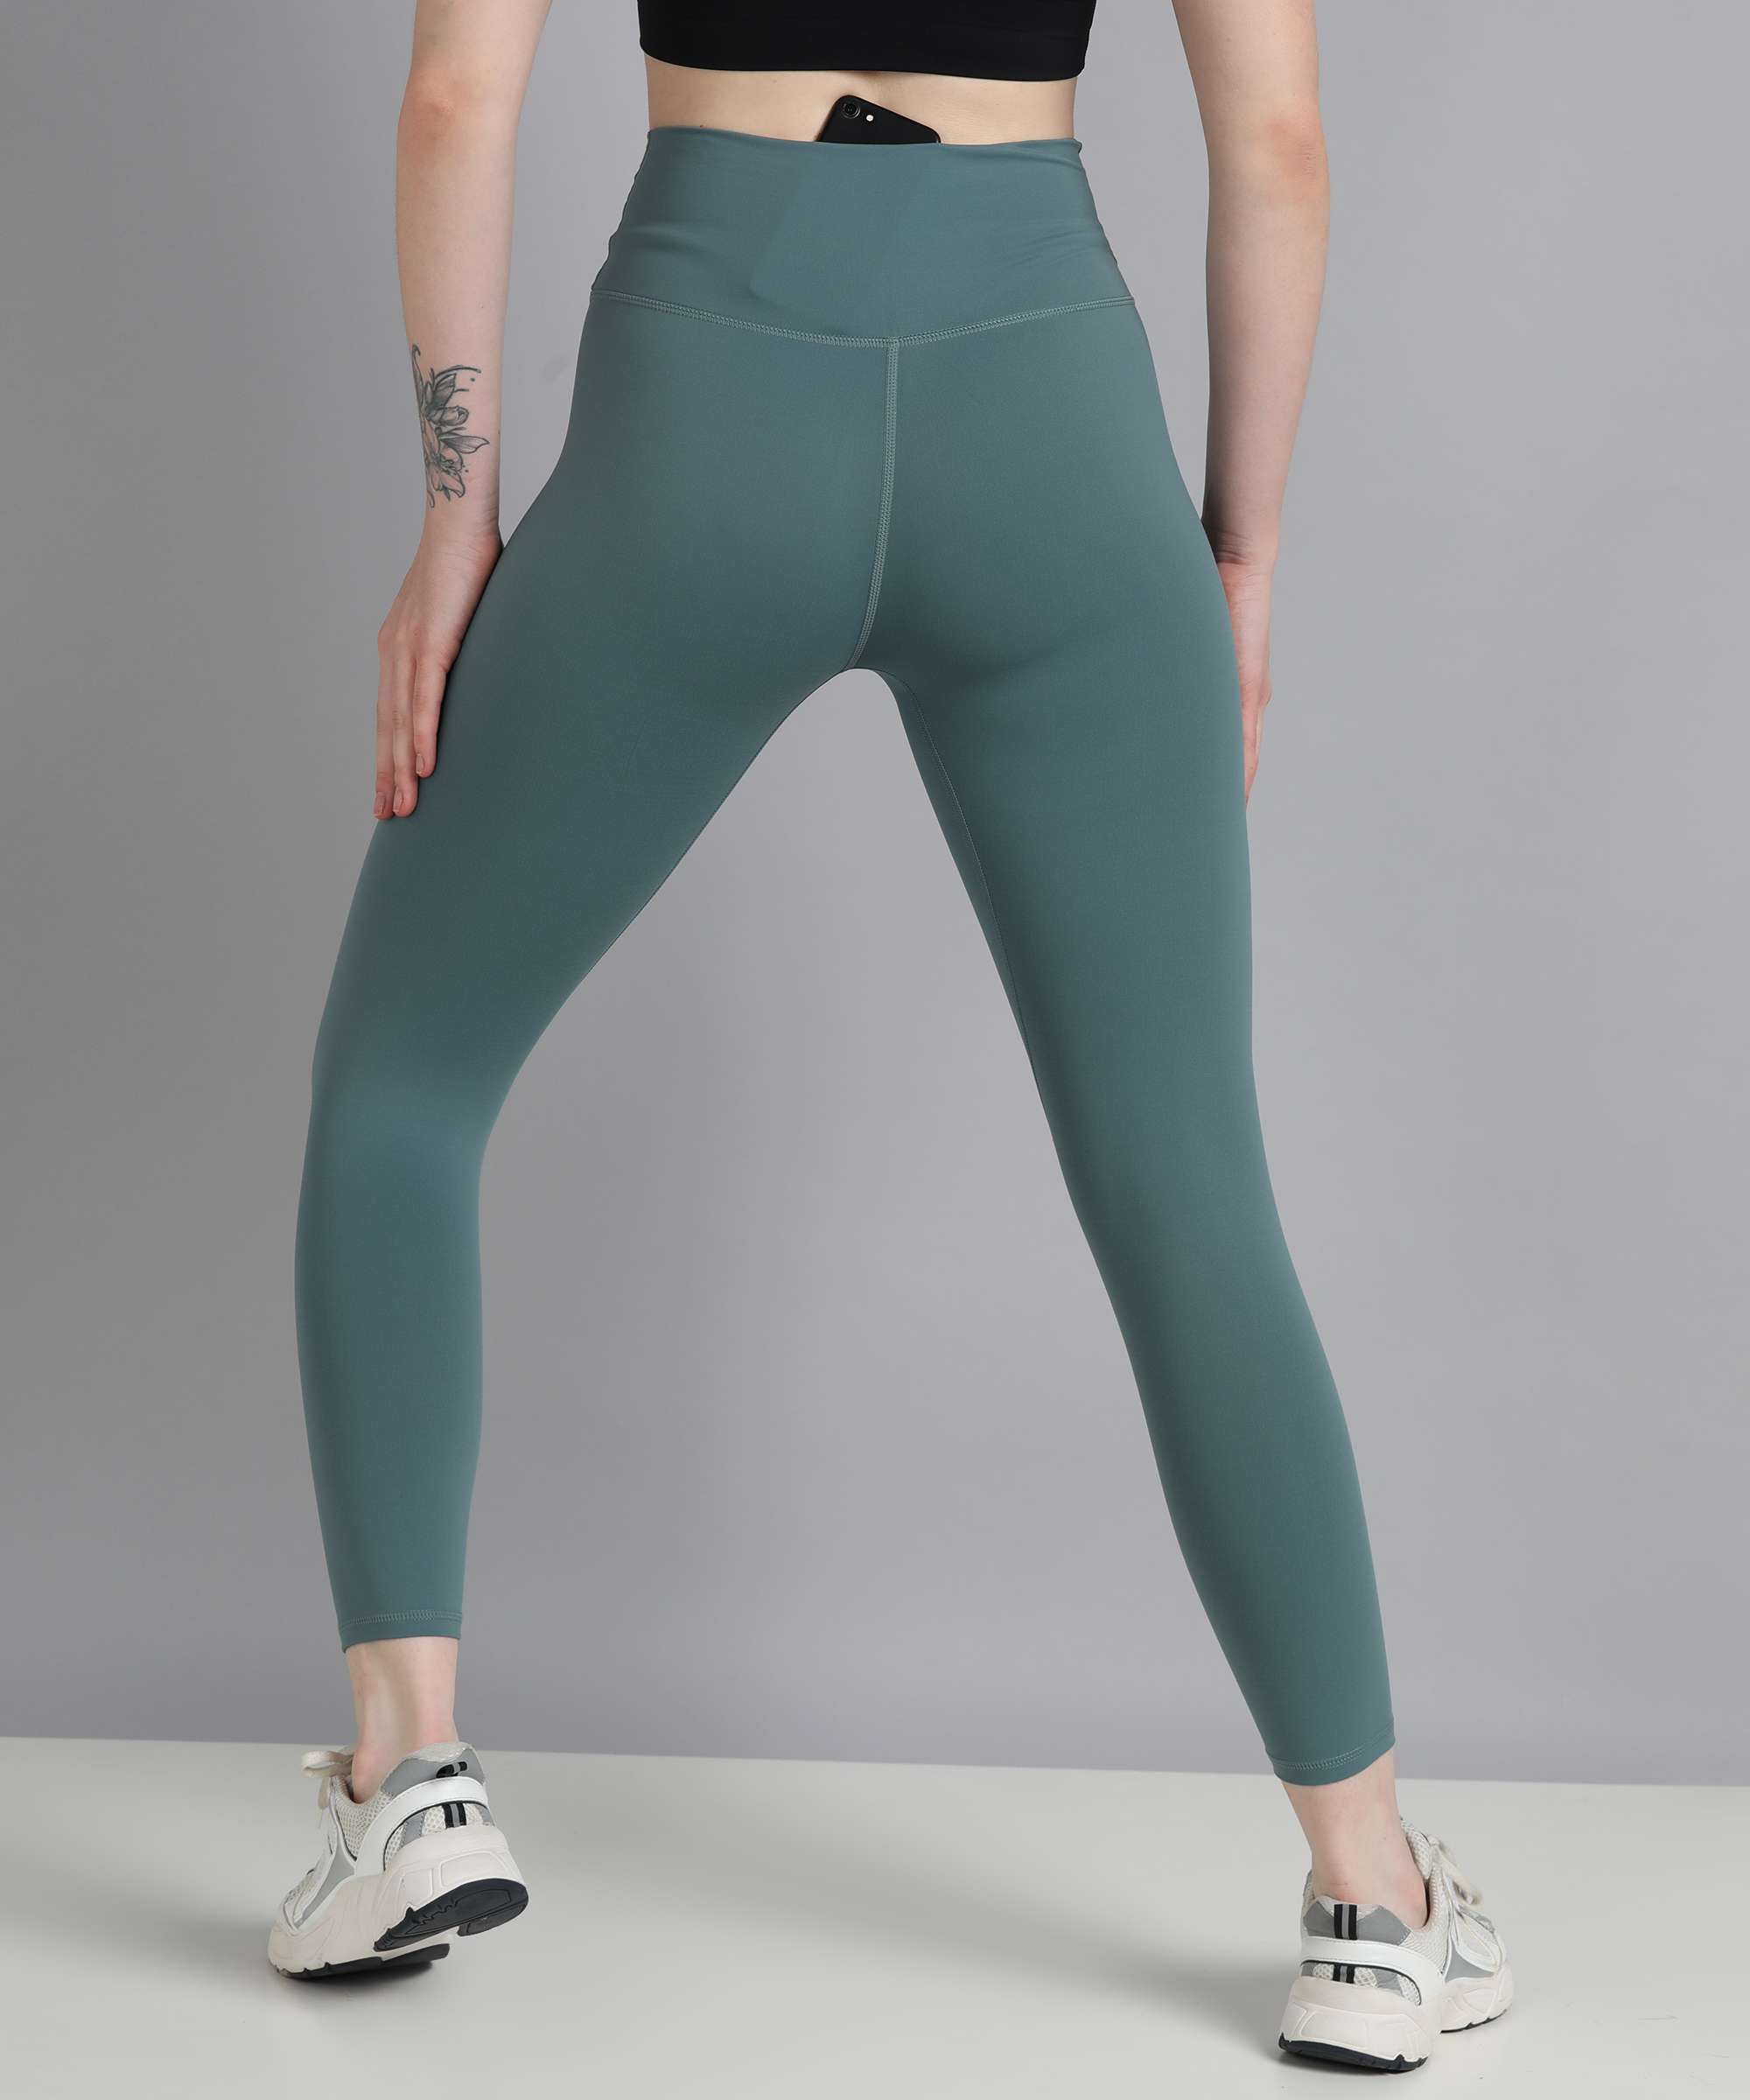 Electric Blue - Performance High Waist Legging with Side Pockets